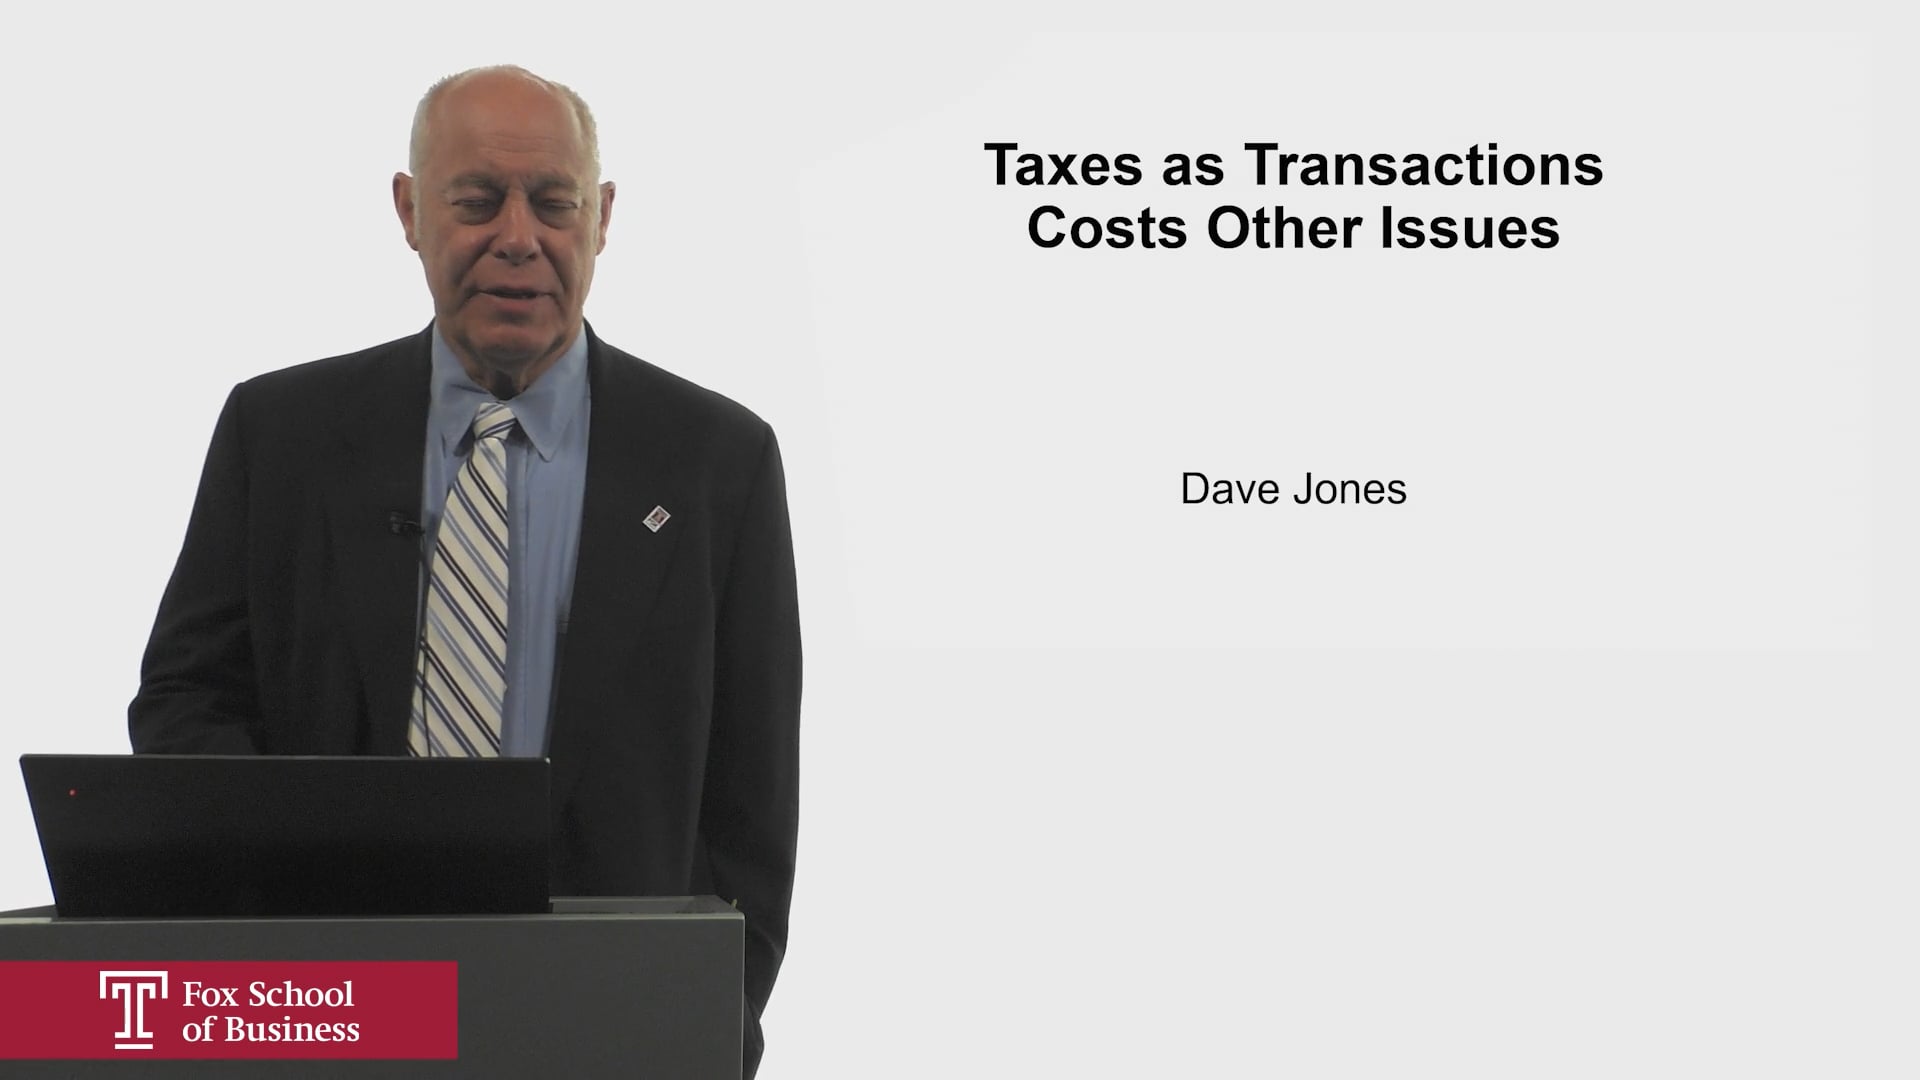 Taxes as Transactions Costs Other Issues